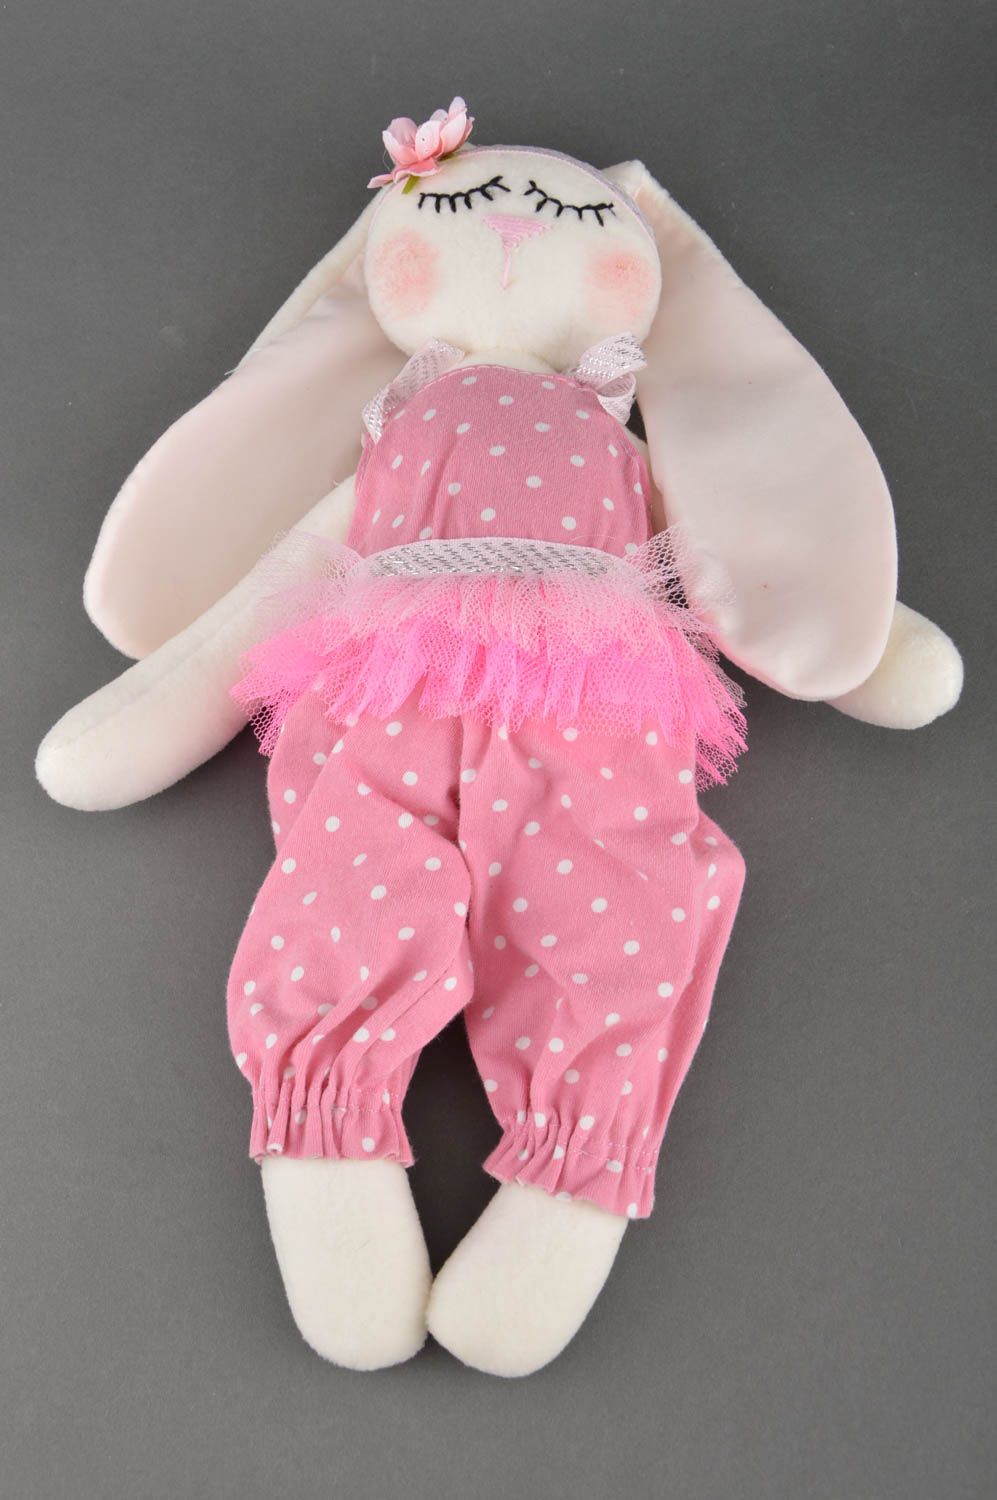 Handmade soft toy sewn of cotton fabric rabbit in pink clothing for children photo 4